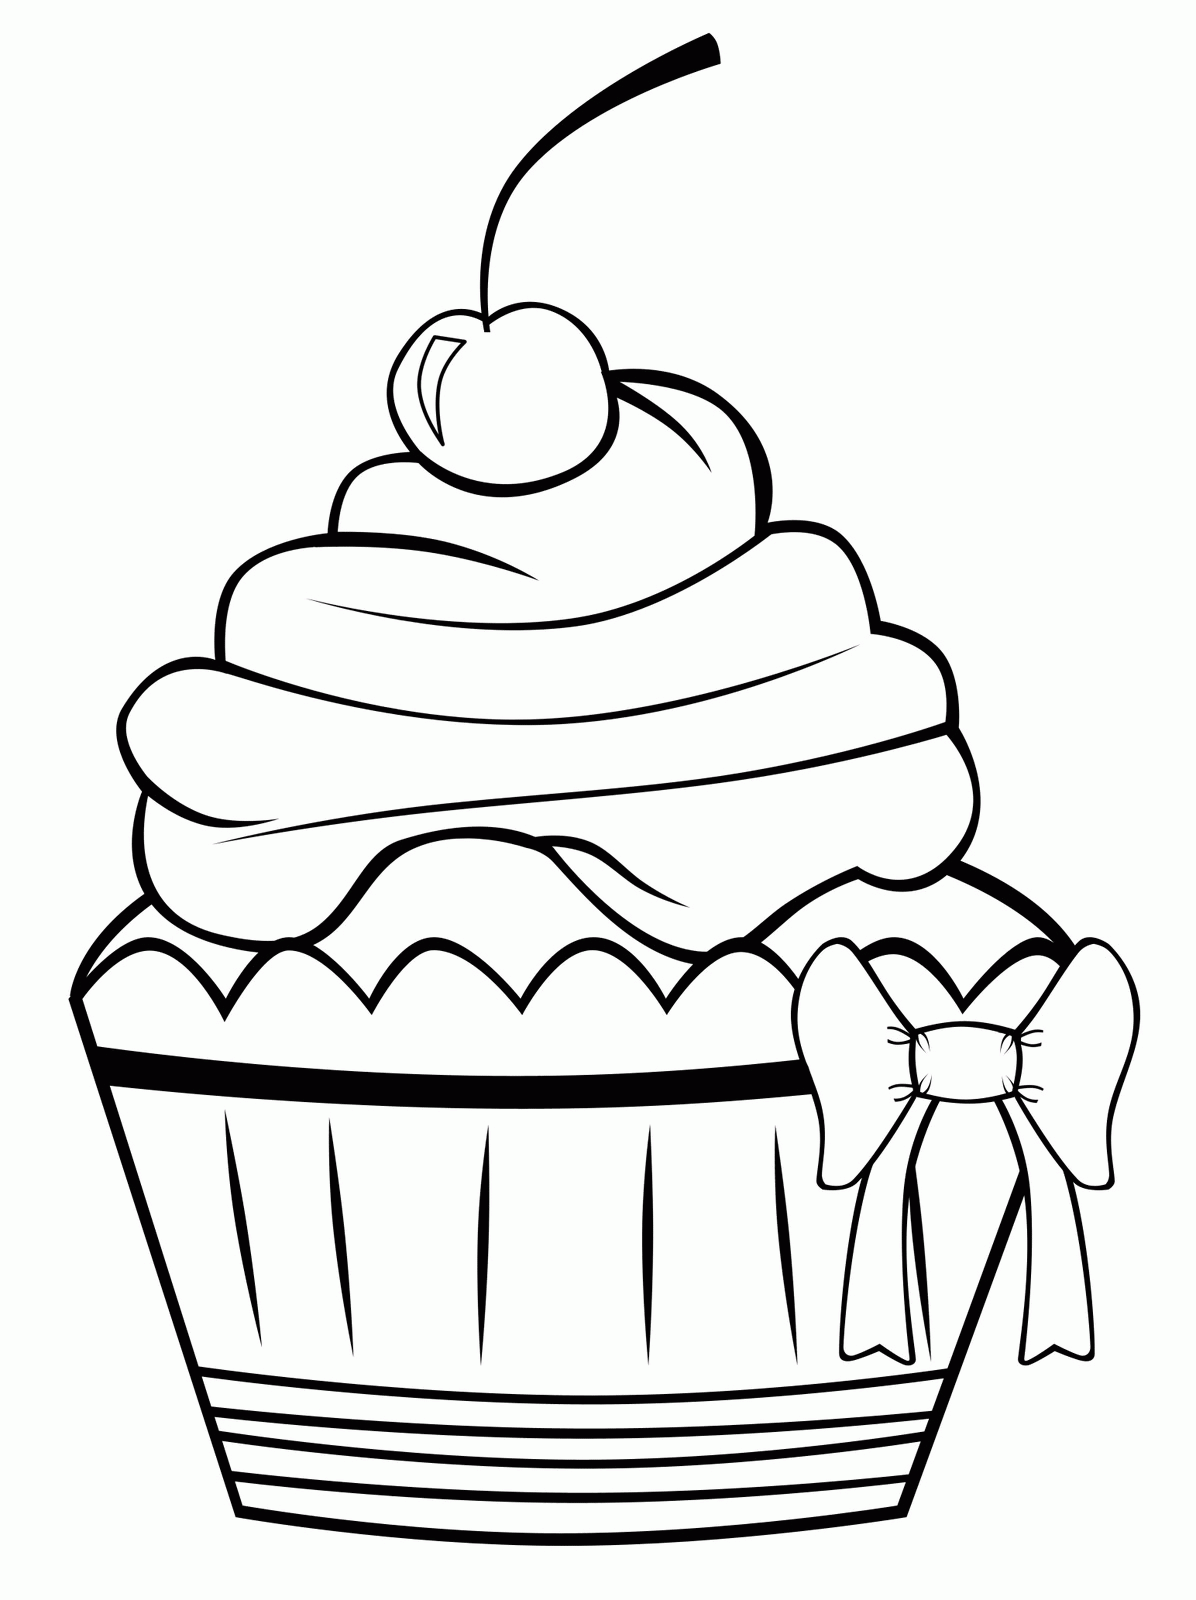 Printable Birthday Cupcake - Coloring Pages for Kids and for Adults